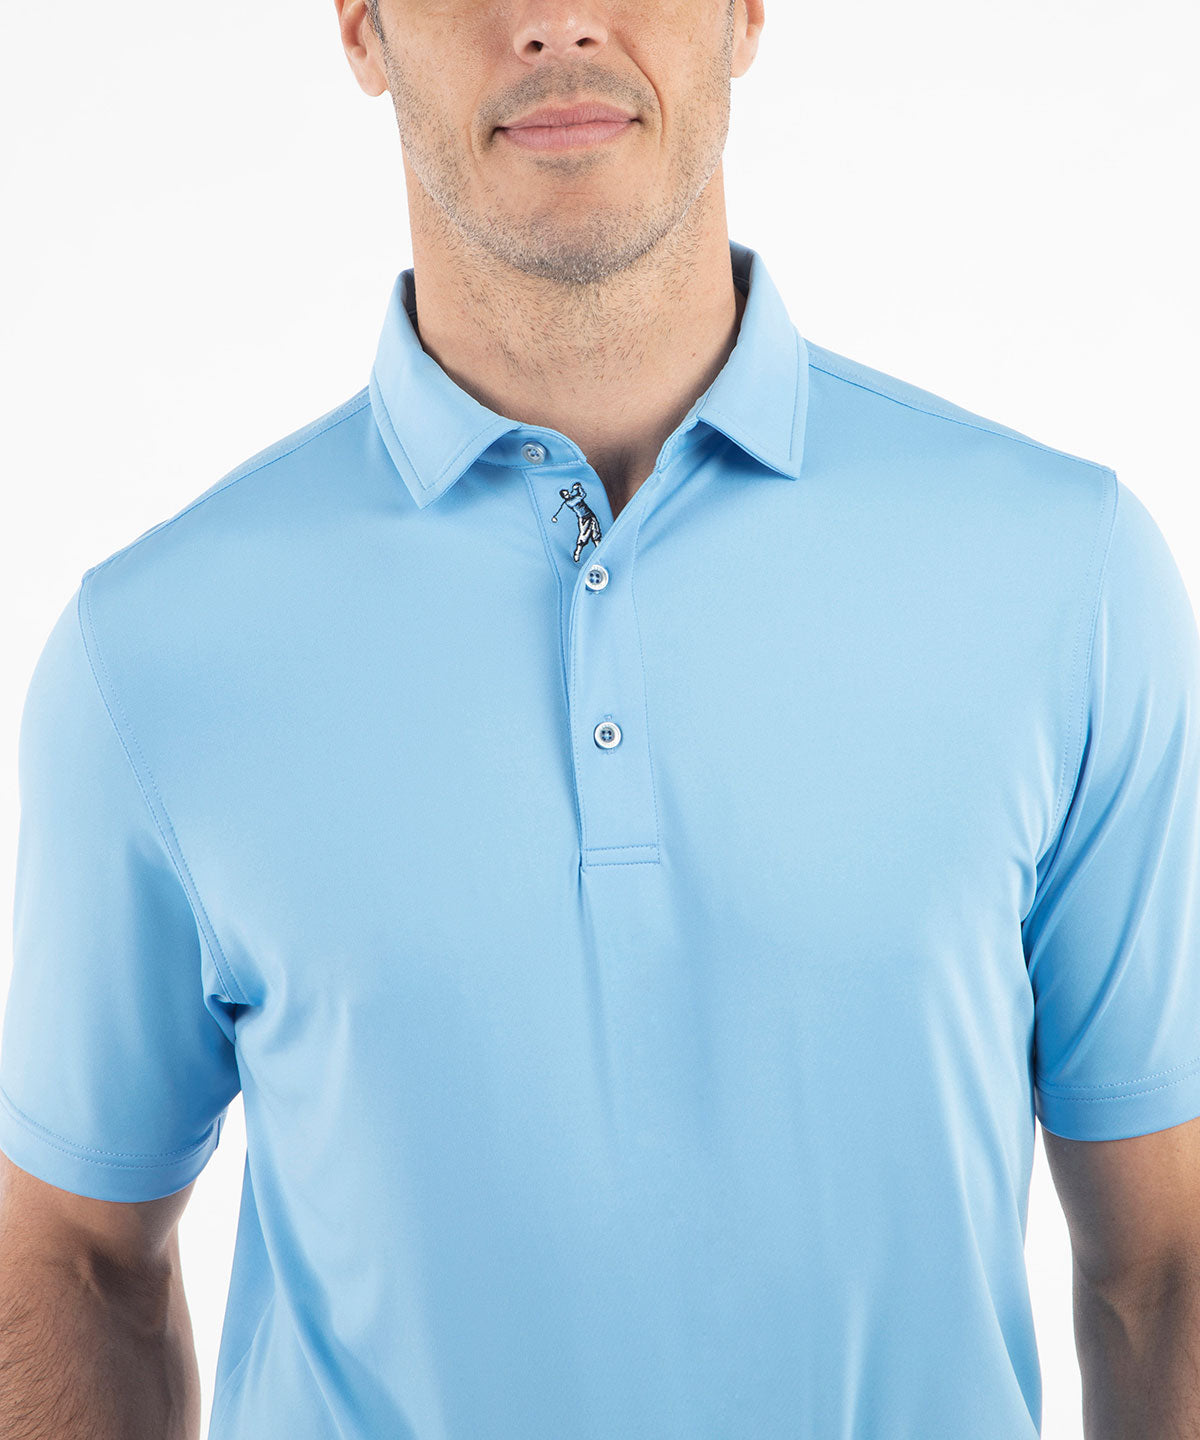 Jersey polo shirt (232MTS373966CW89302) for Man